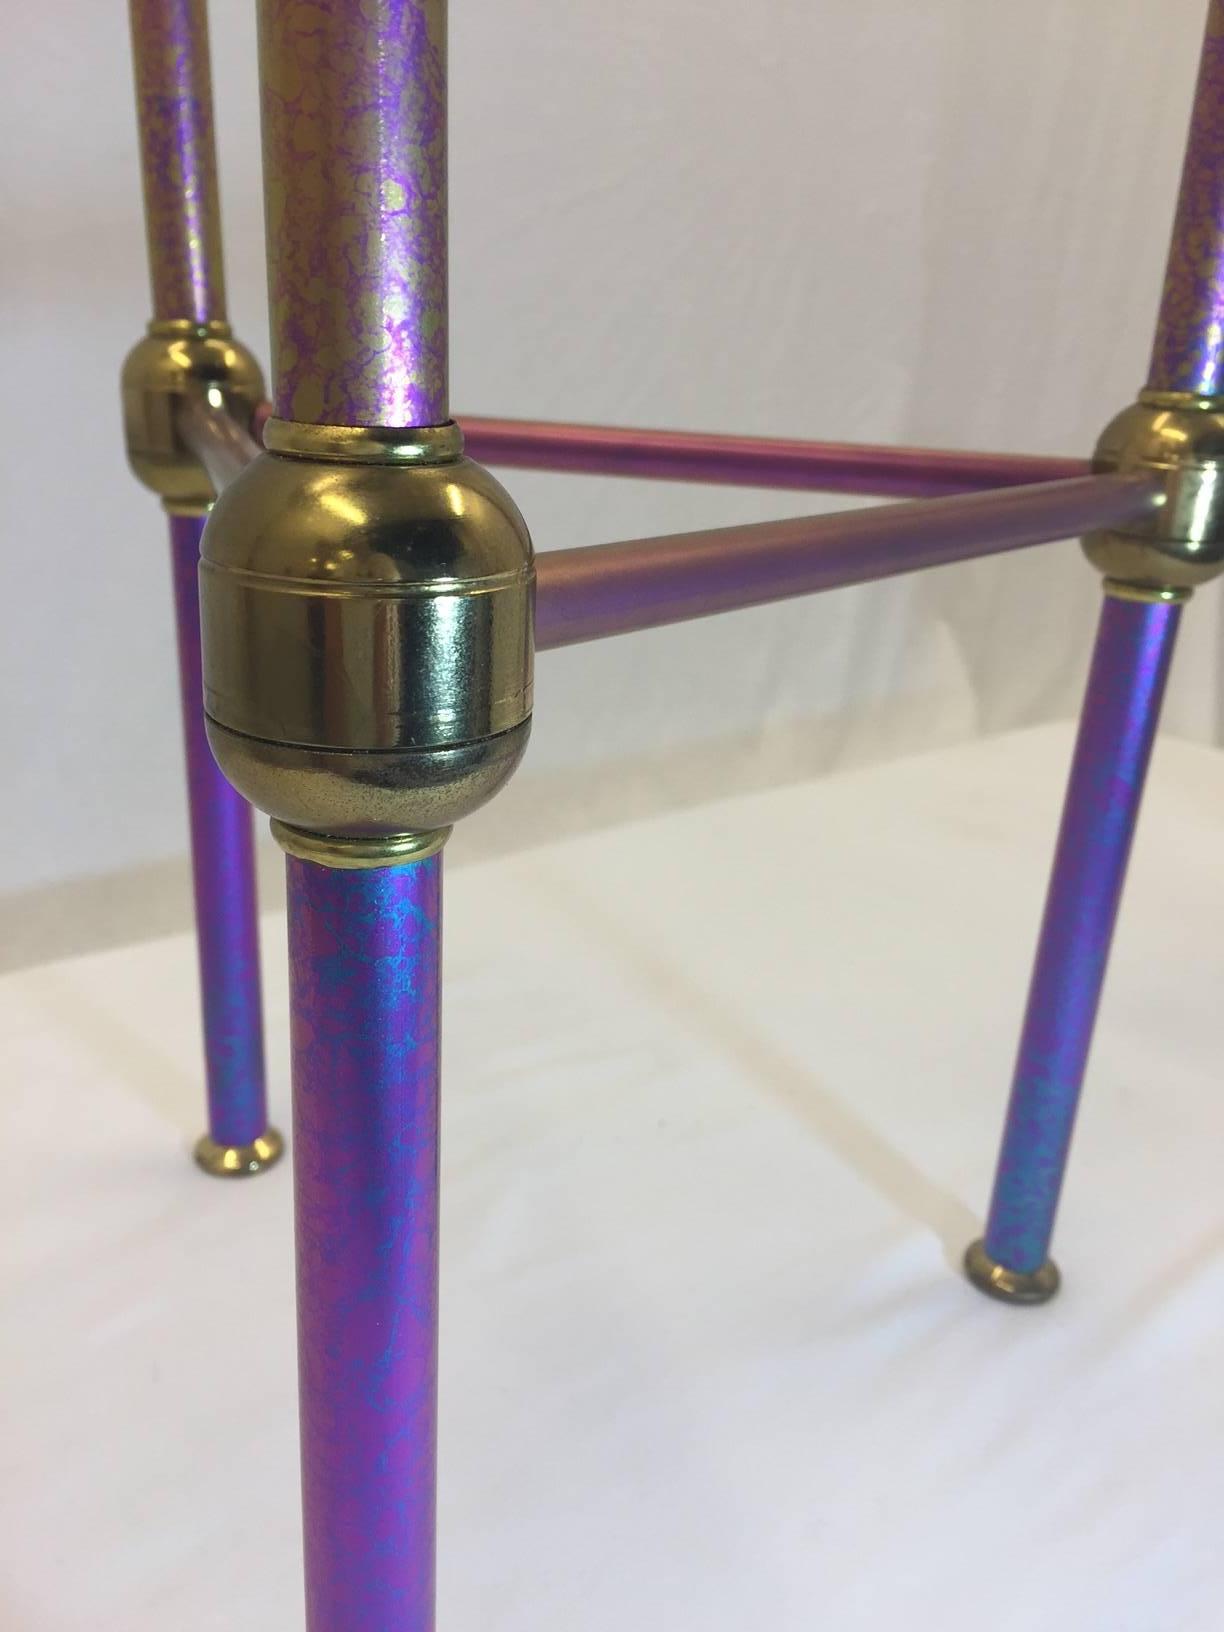 This piece was brought to us as a Specter candlestick holder created as a prototype by Specter but never produced. This is a one of a kind. It is made of iridescent titanium and brings a shimmery range of colors from fuchsia to deep purple and is